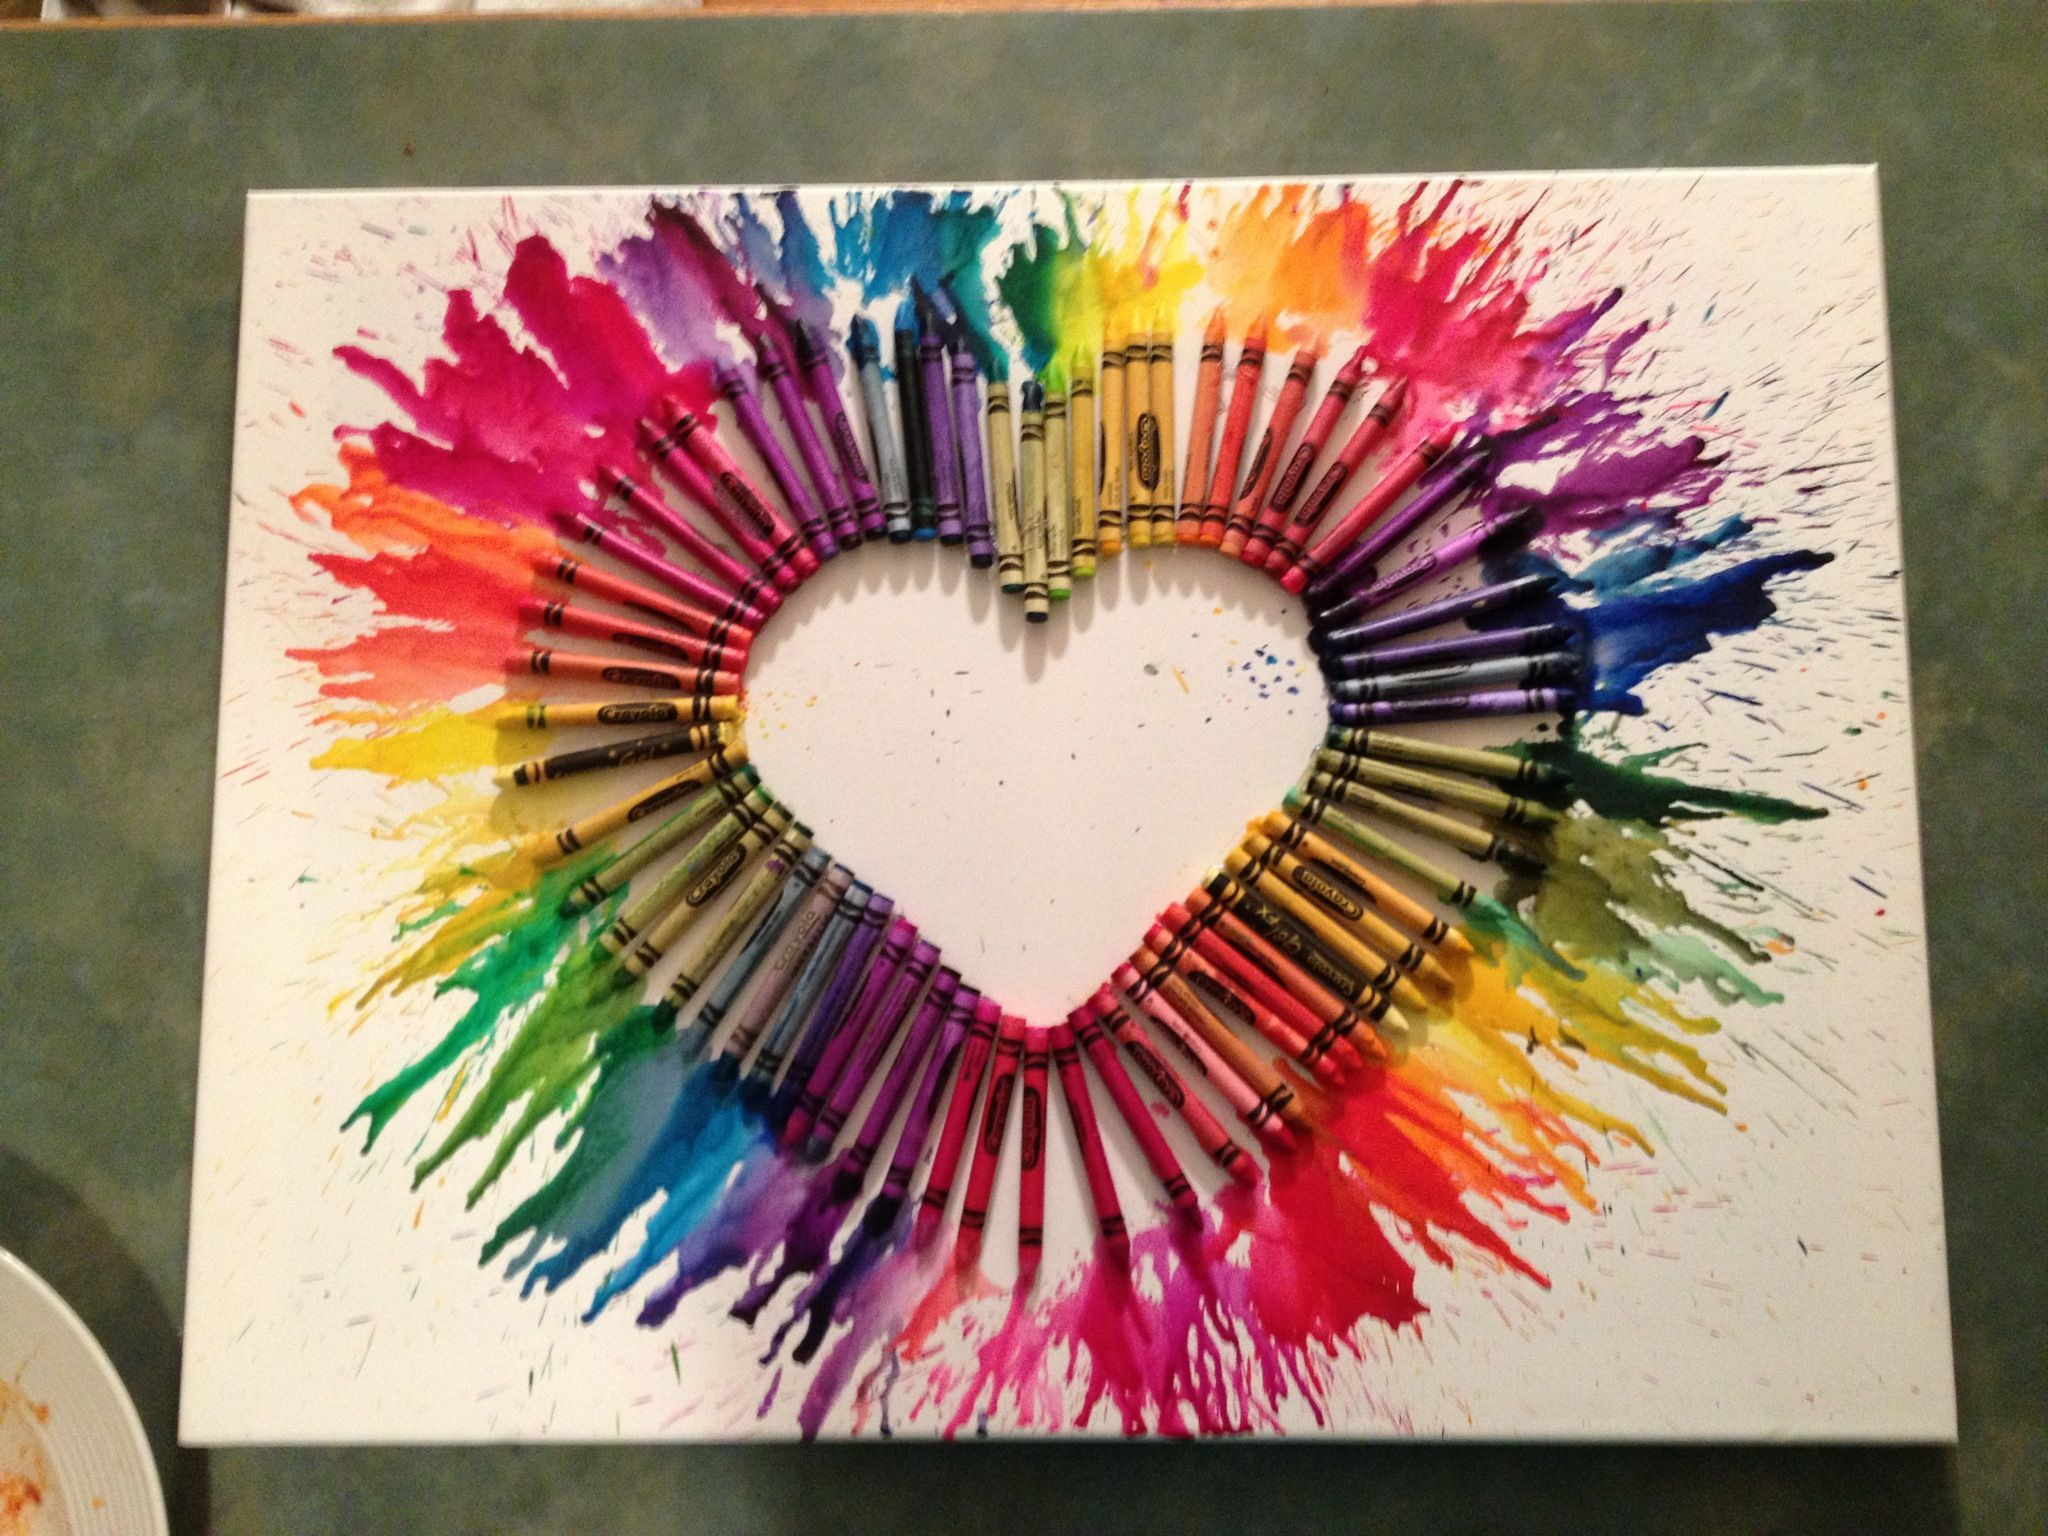 Best ideas about Pinterest Arts And Crafts For Adults
. Save or Pin Crayon art Arts and crafts project Now.